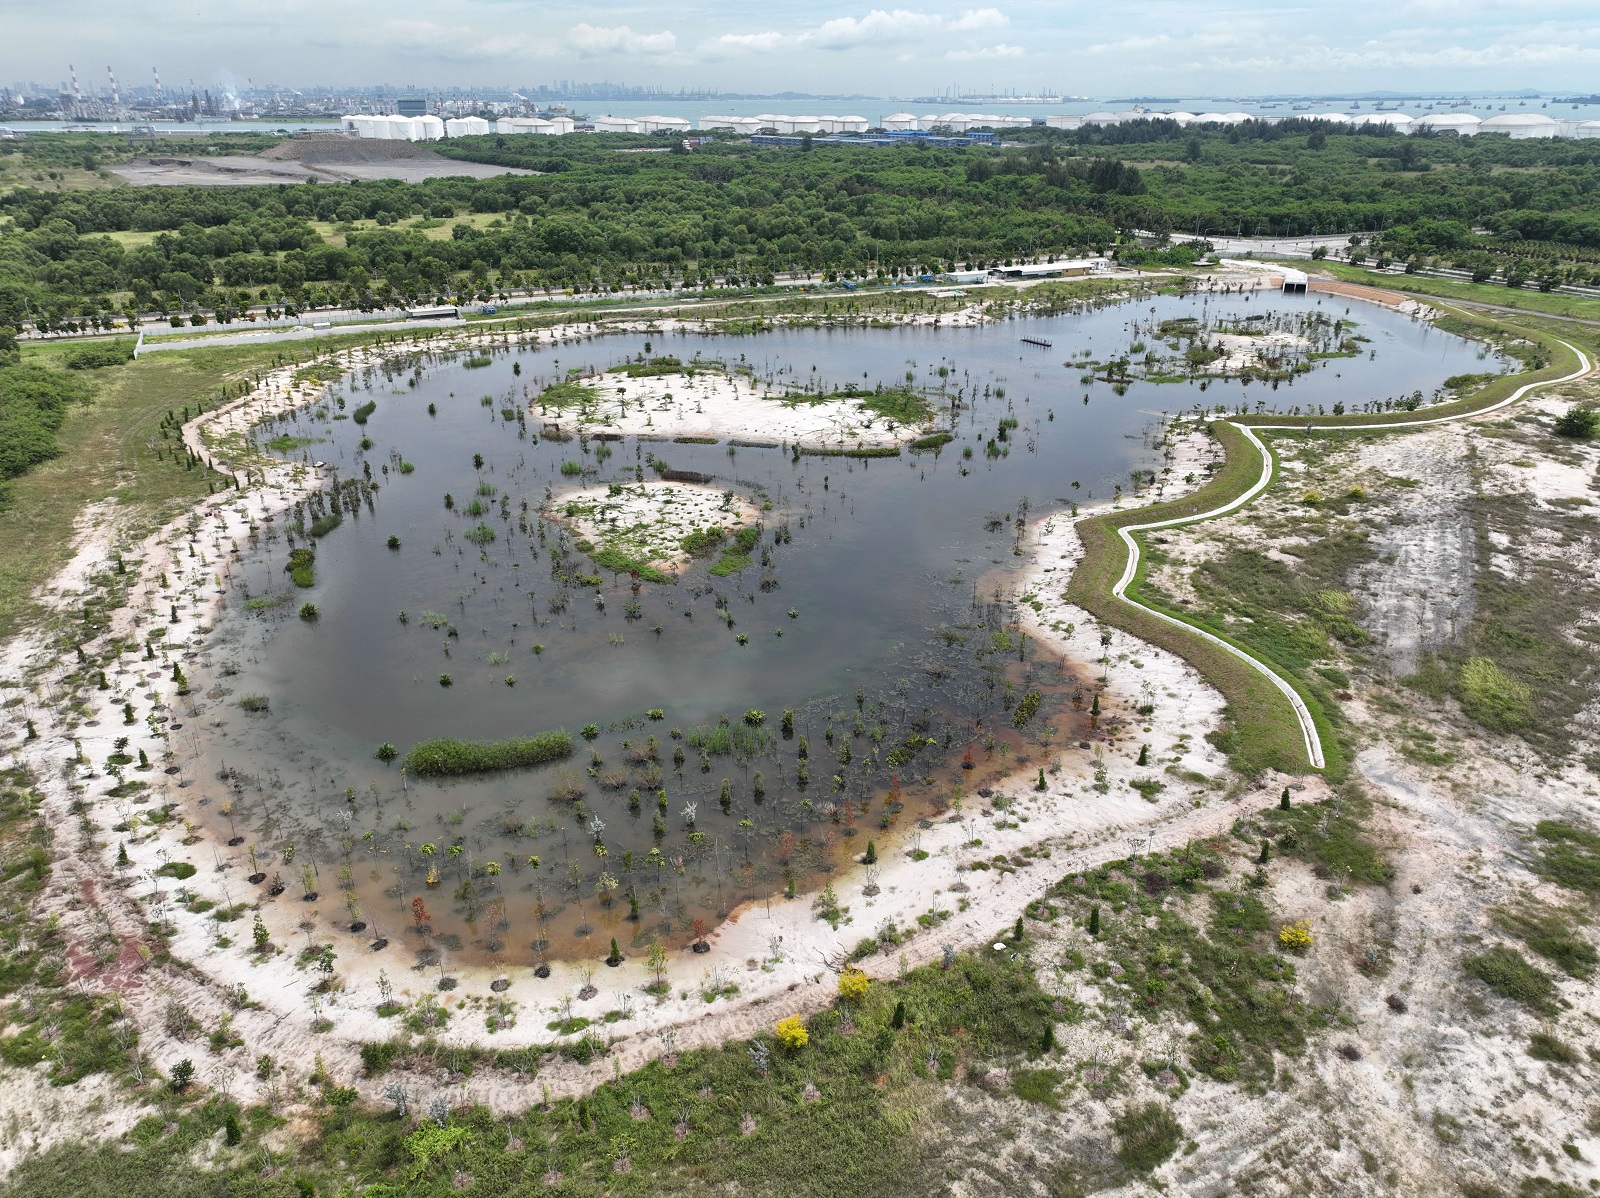 Aerial shot of the Jurong Island pond captures the design in its entirety